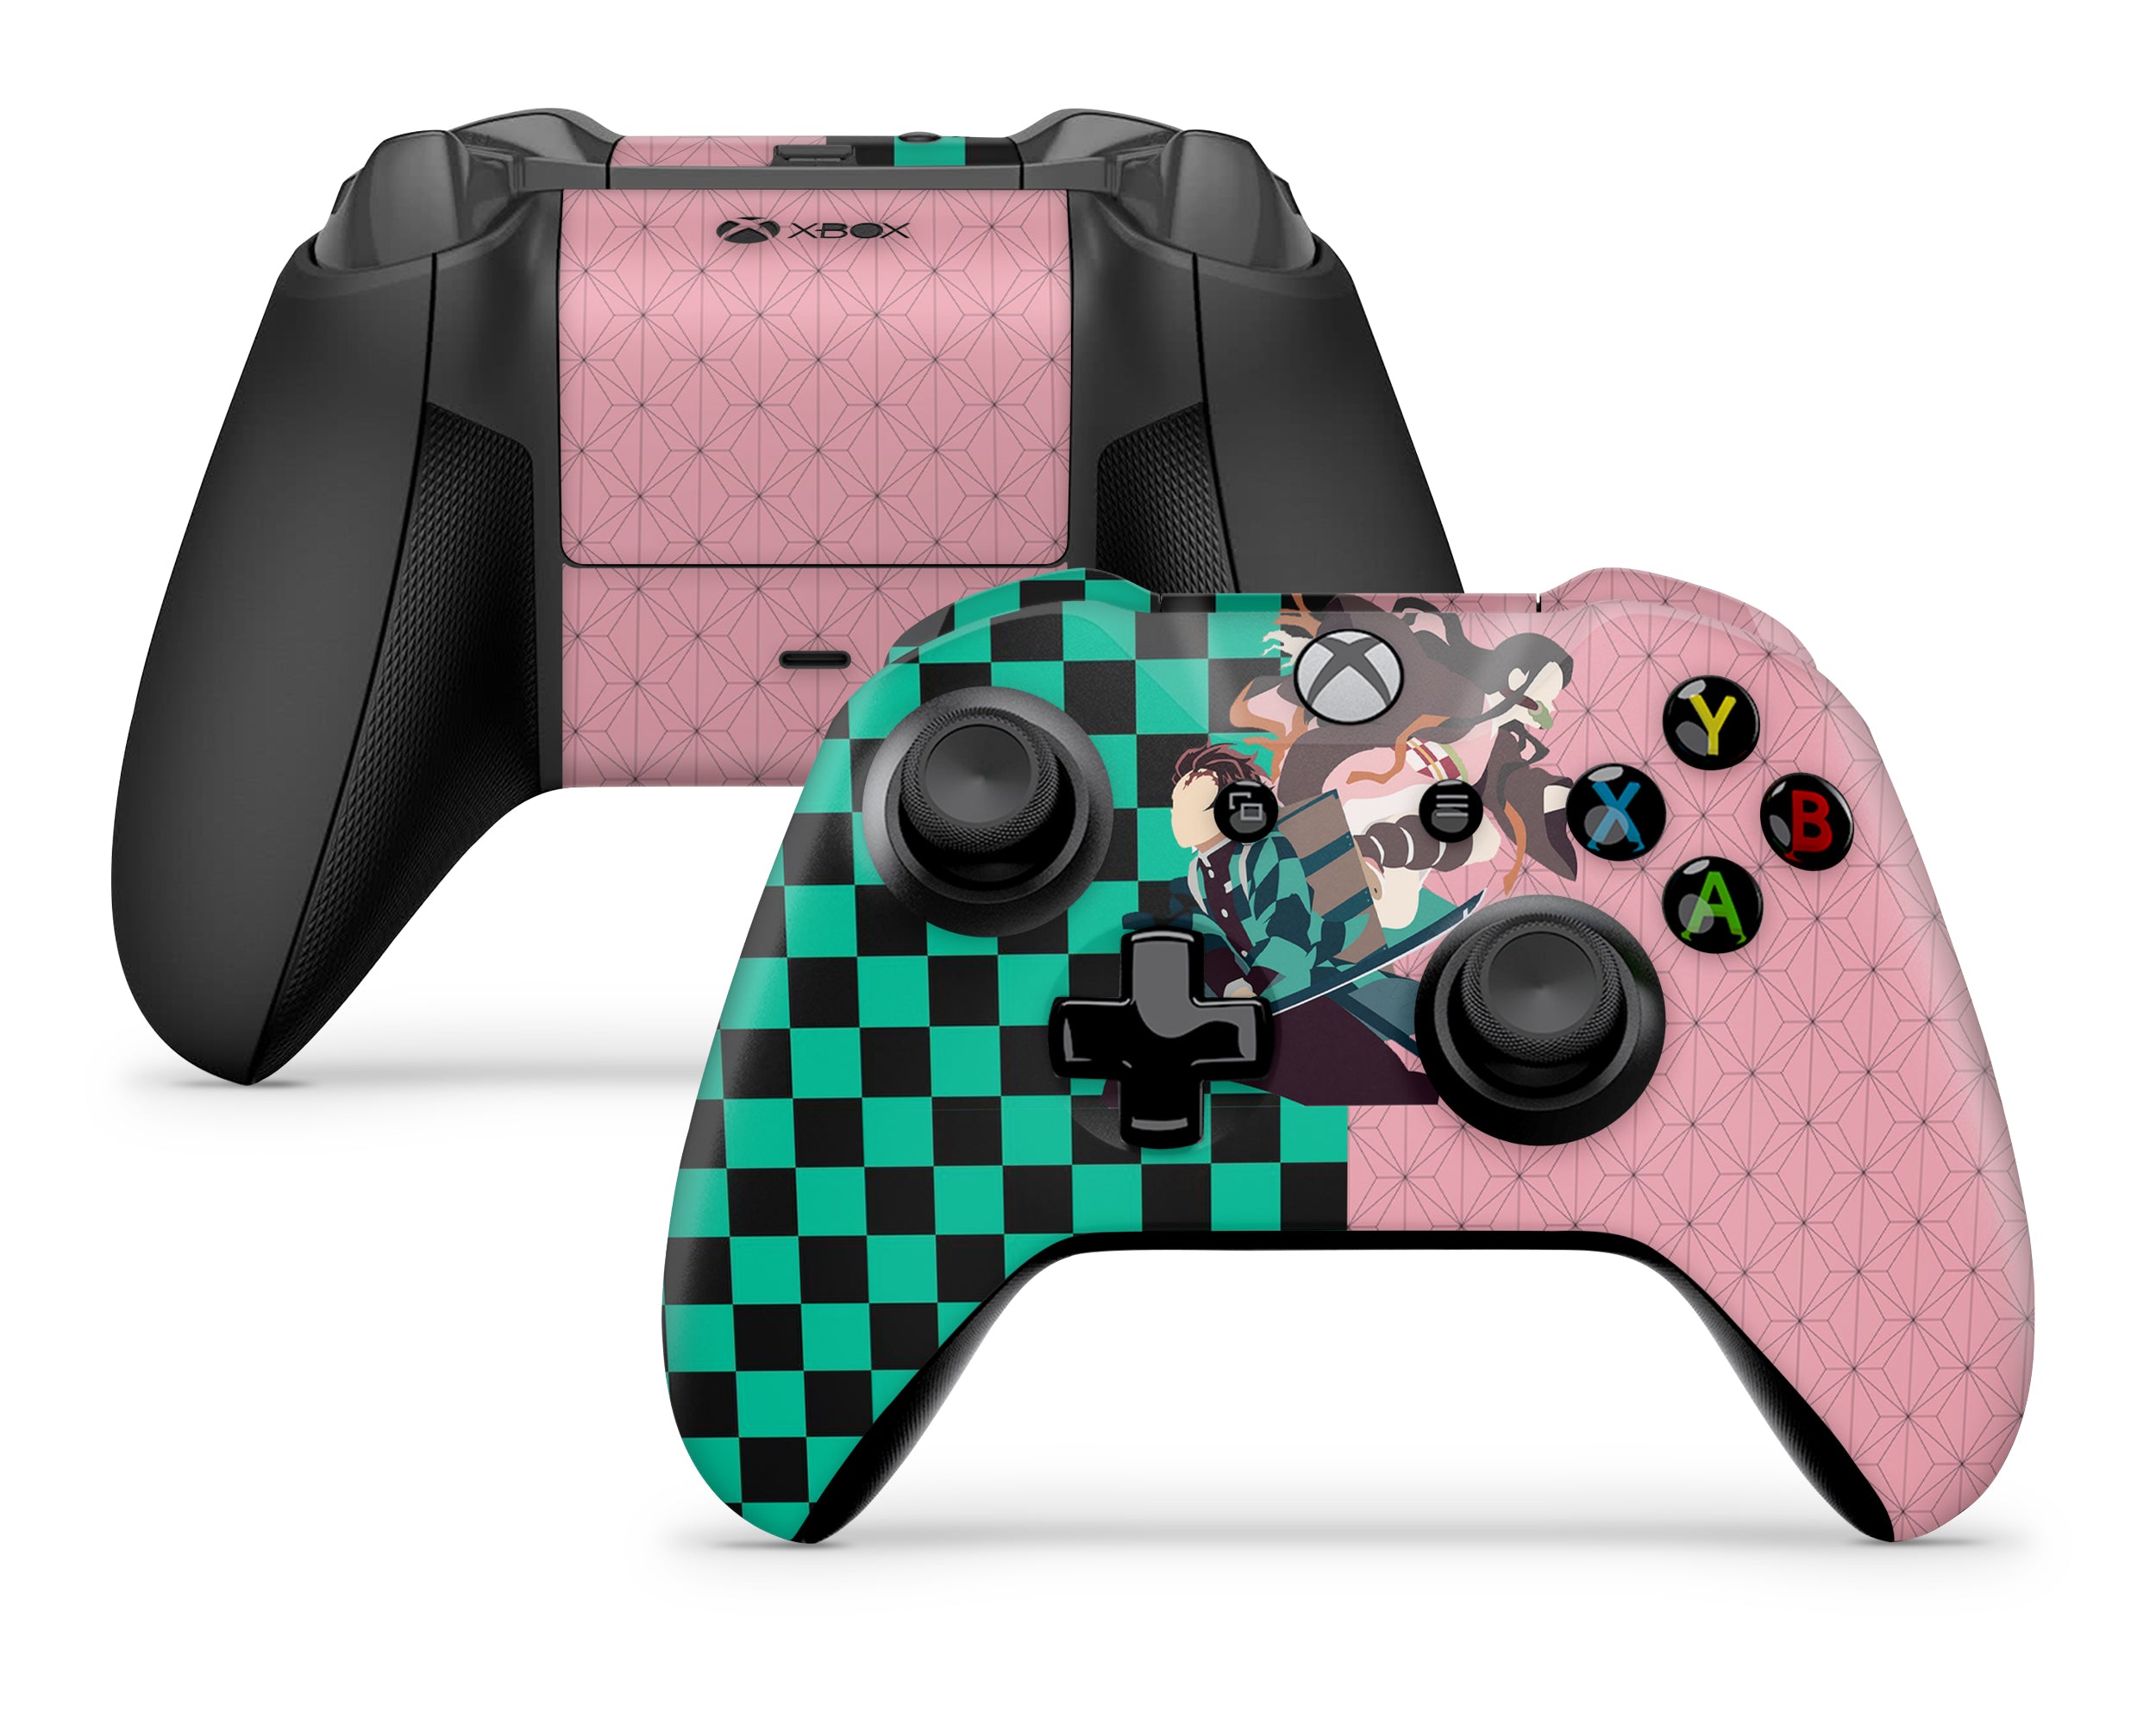 Amazon.com: Vanknight XB One X Console Skin Wrap Decal Skin Vinyl Stickers  for XB One X Console Controllers Anime Girl : Video Games